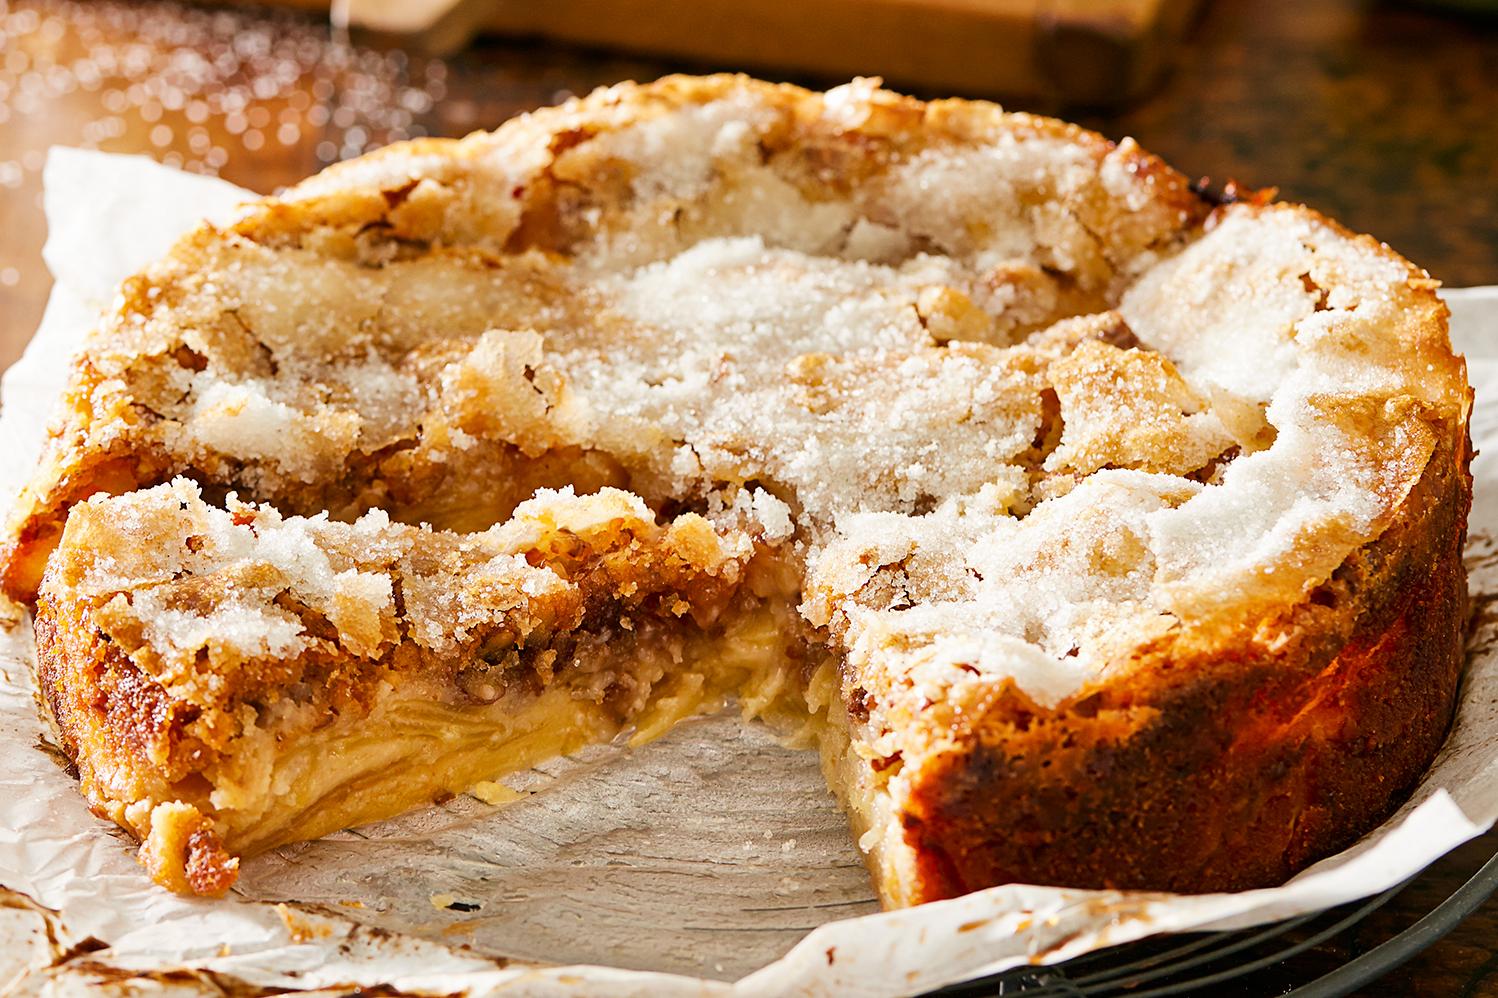  Topped with pecans and cinnamon, this cake is a match made in heaven!